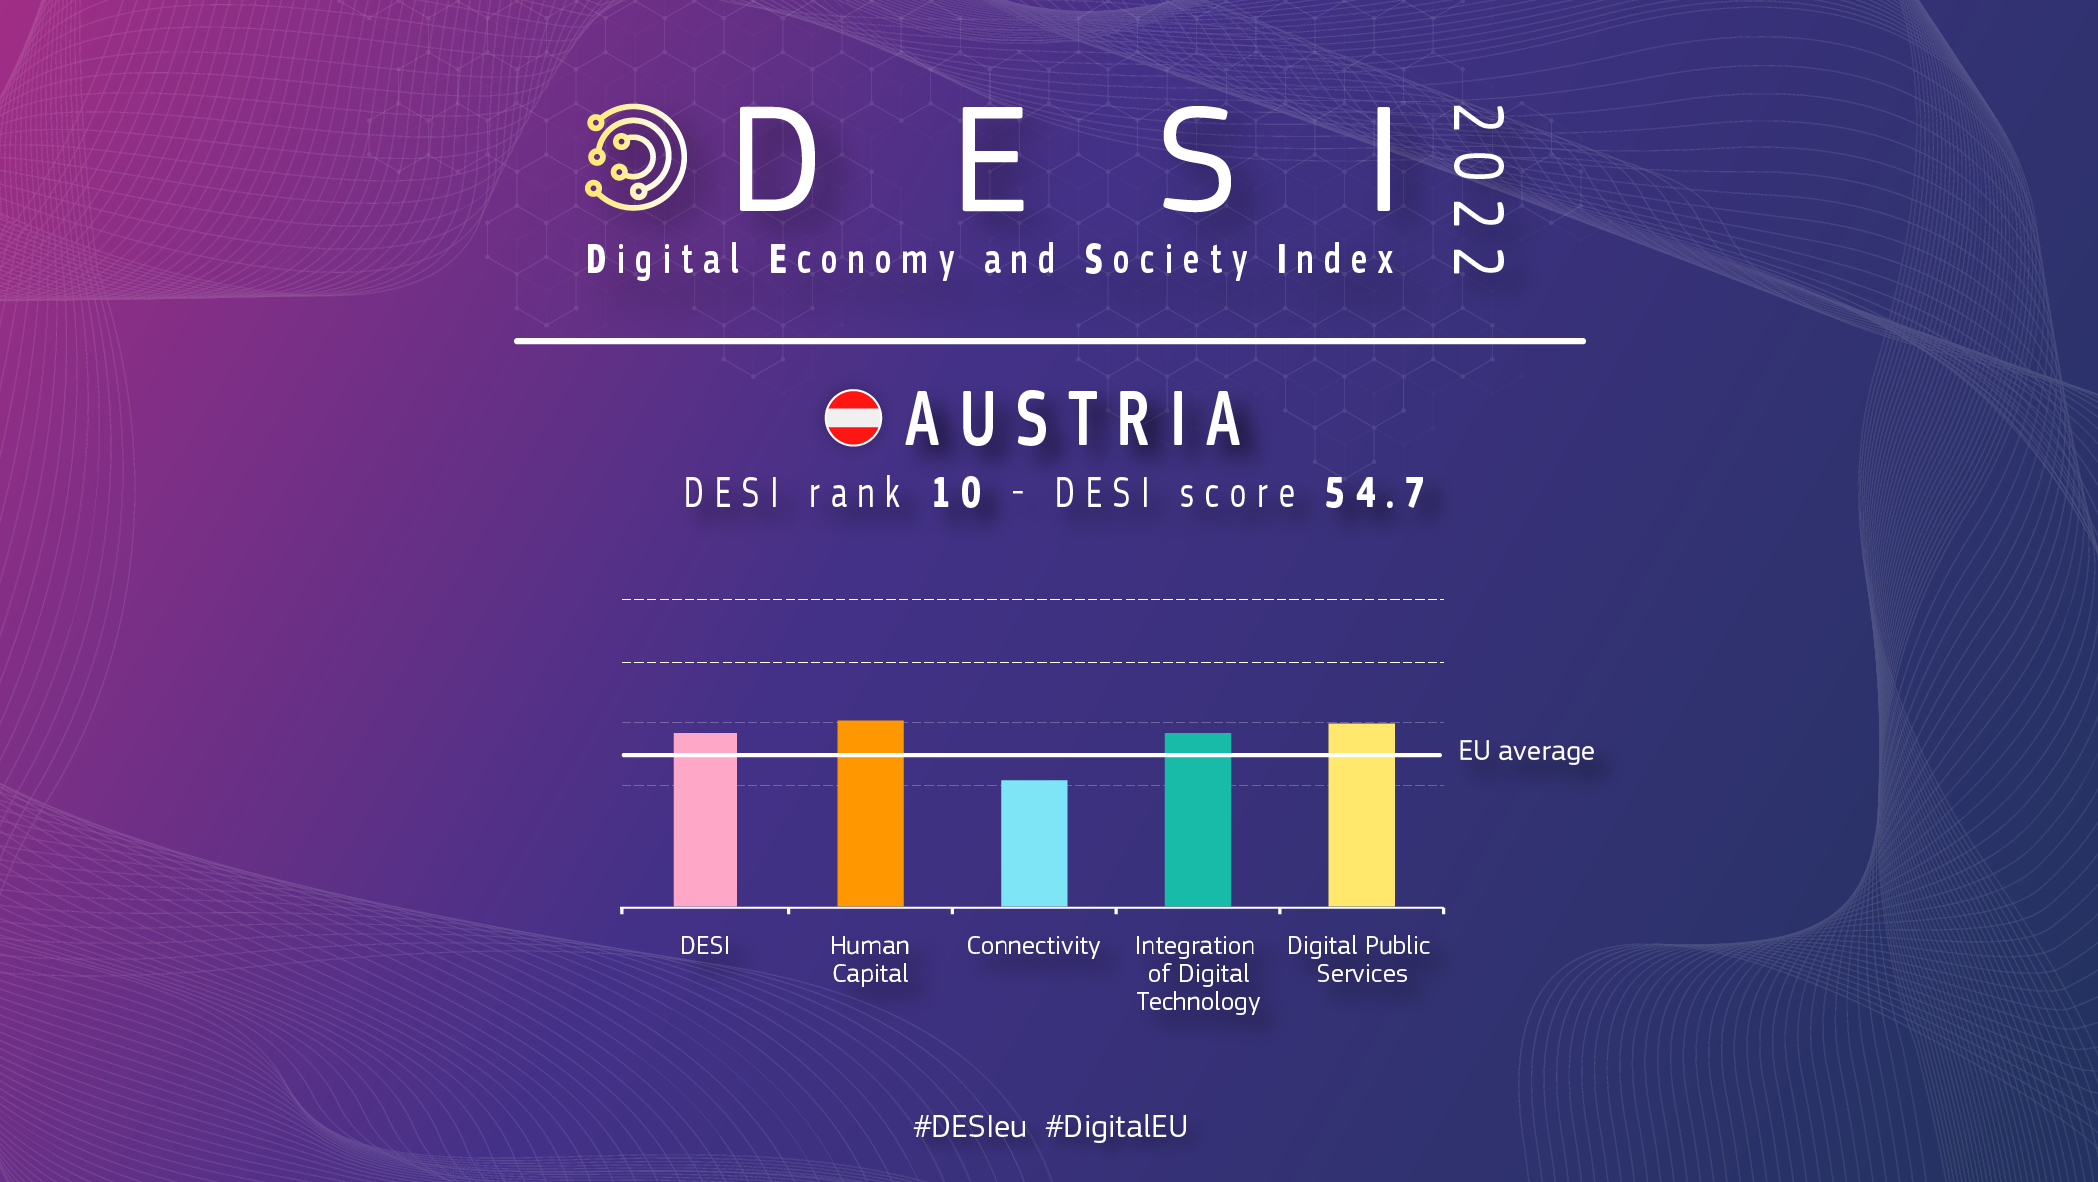 Graphic overview of Austria in DESI showing a ranking of 10 and a score of 54.7